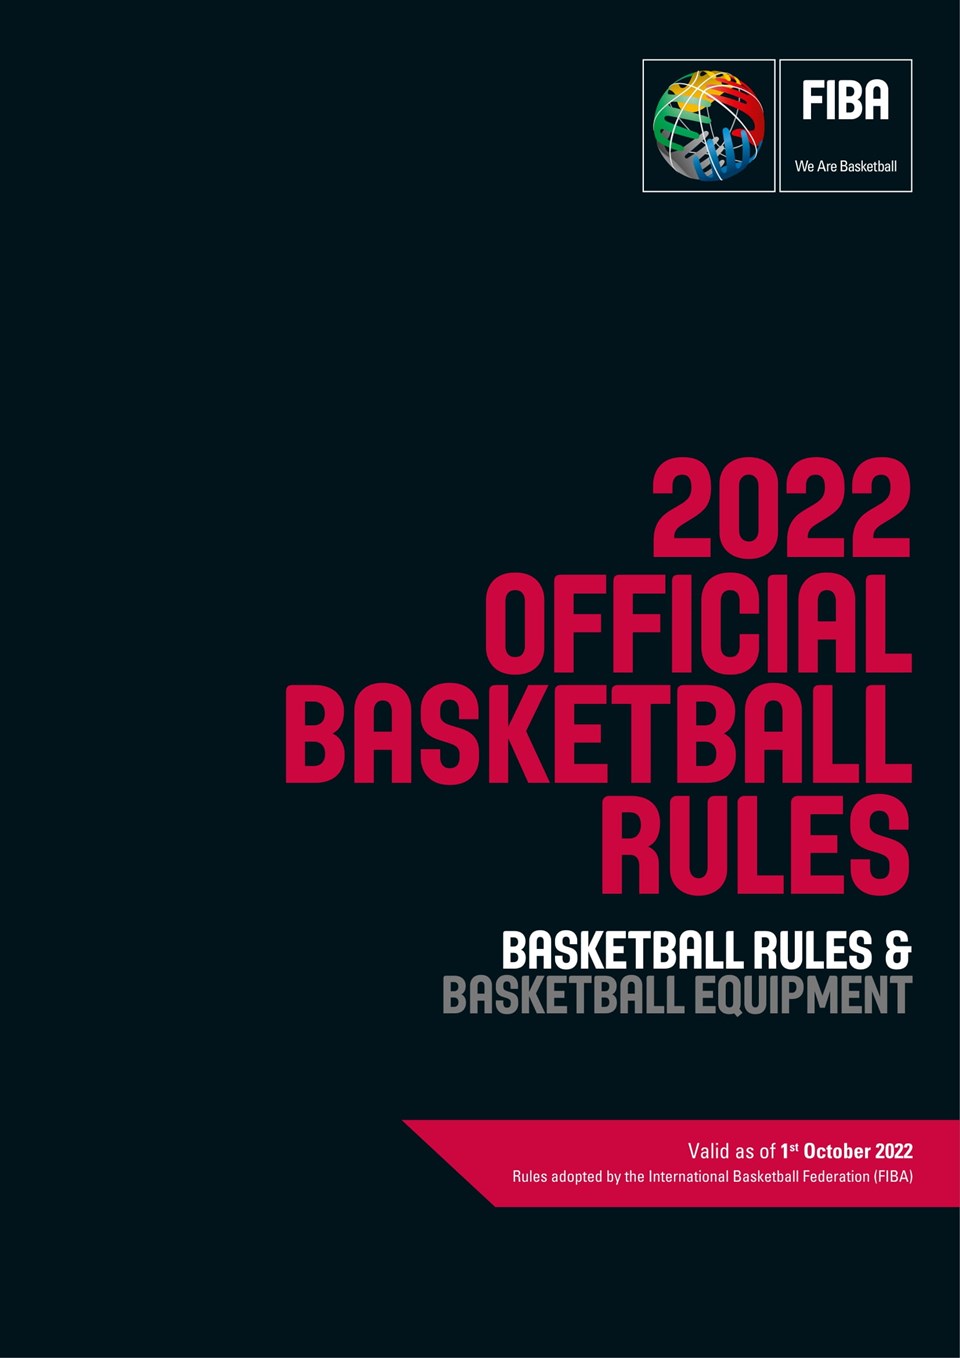 FIBA Official Basketball Rules 2022 set to come into force October 1 Porn Photo Hd